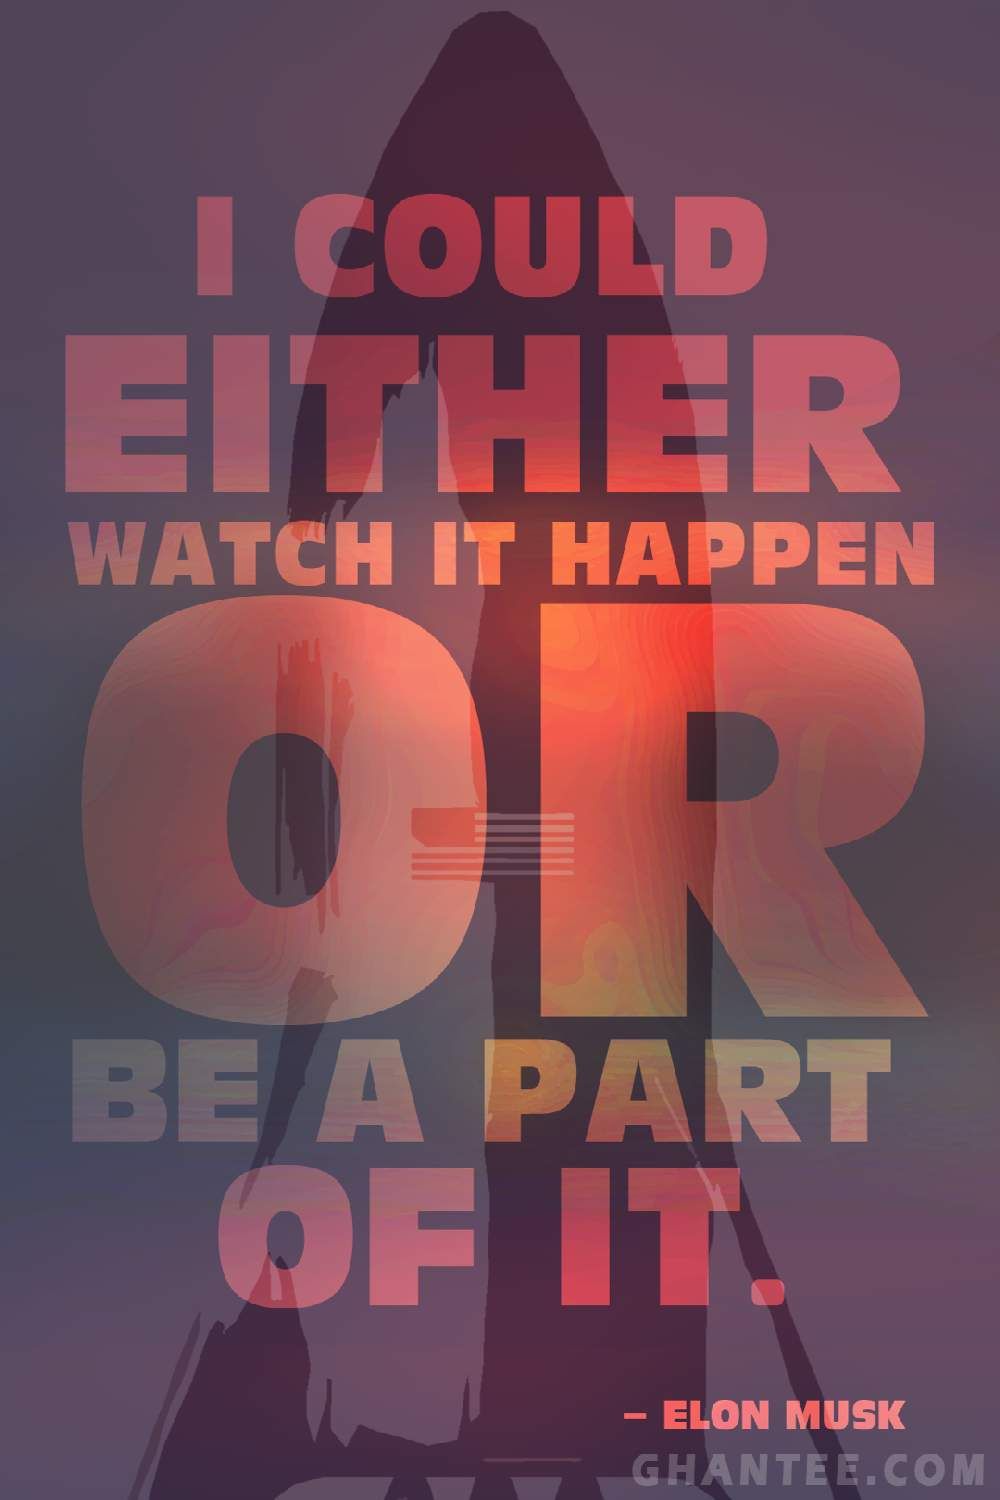 I Could either Watch it Happen Or be a part of it. Elon musk quotes, Elon musk, HD quotes